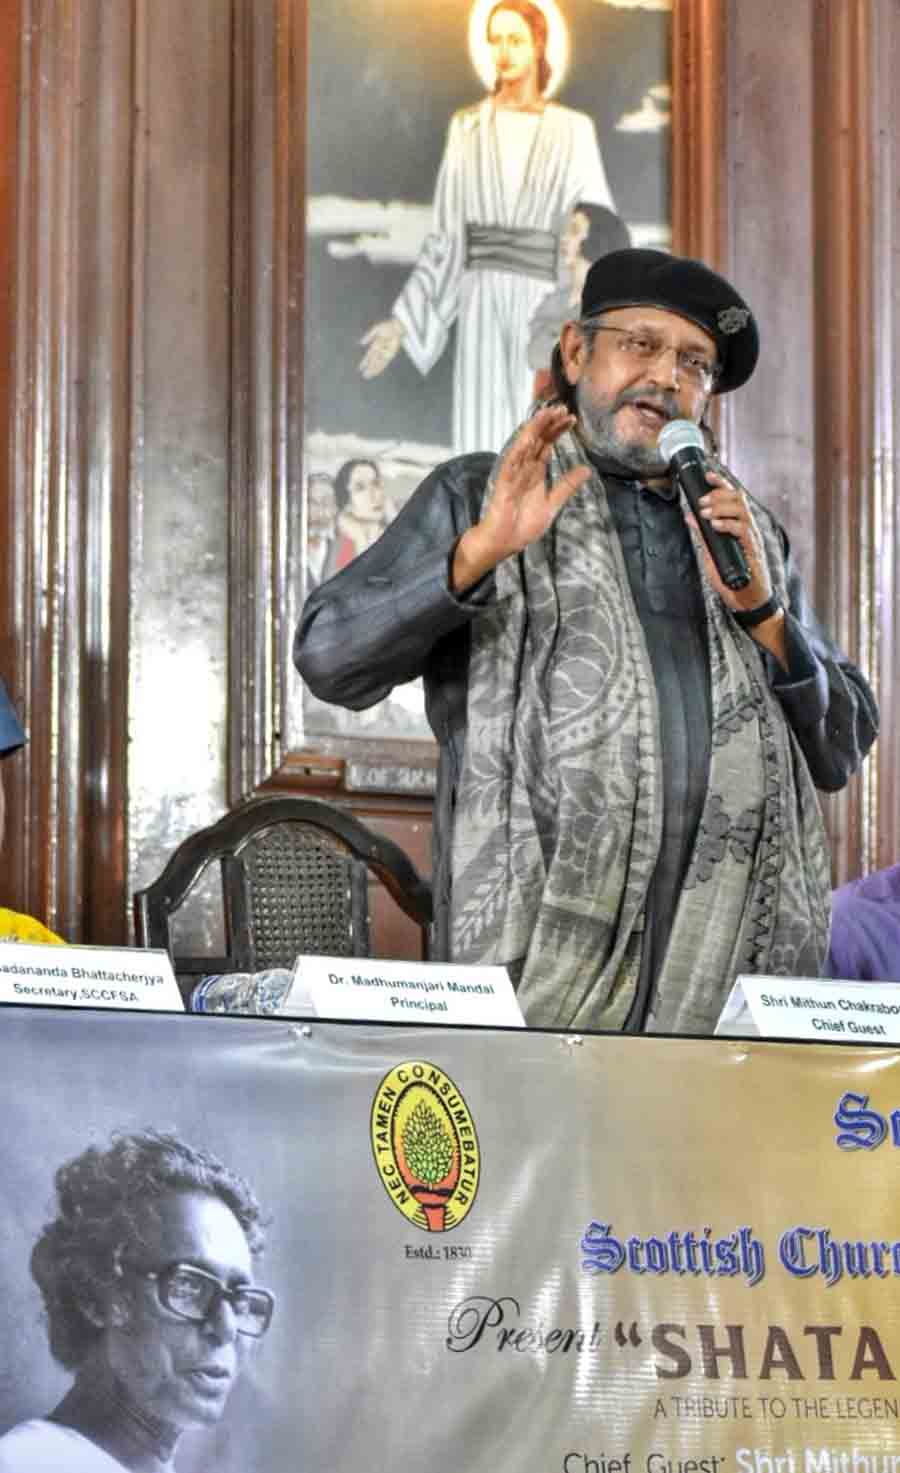 Actor Mithun Chakraborty was the chief guest at a Mrinal Sen Satabarsha event organised by Scottish Church College to pay tribute to the filmmaker  